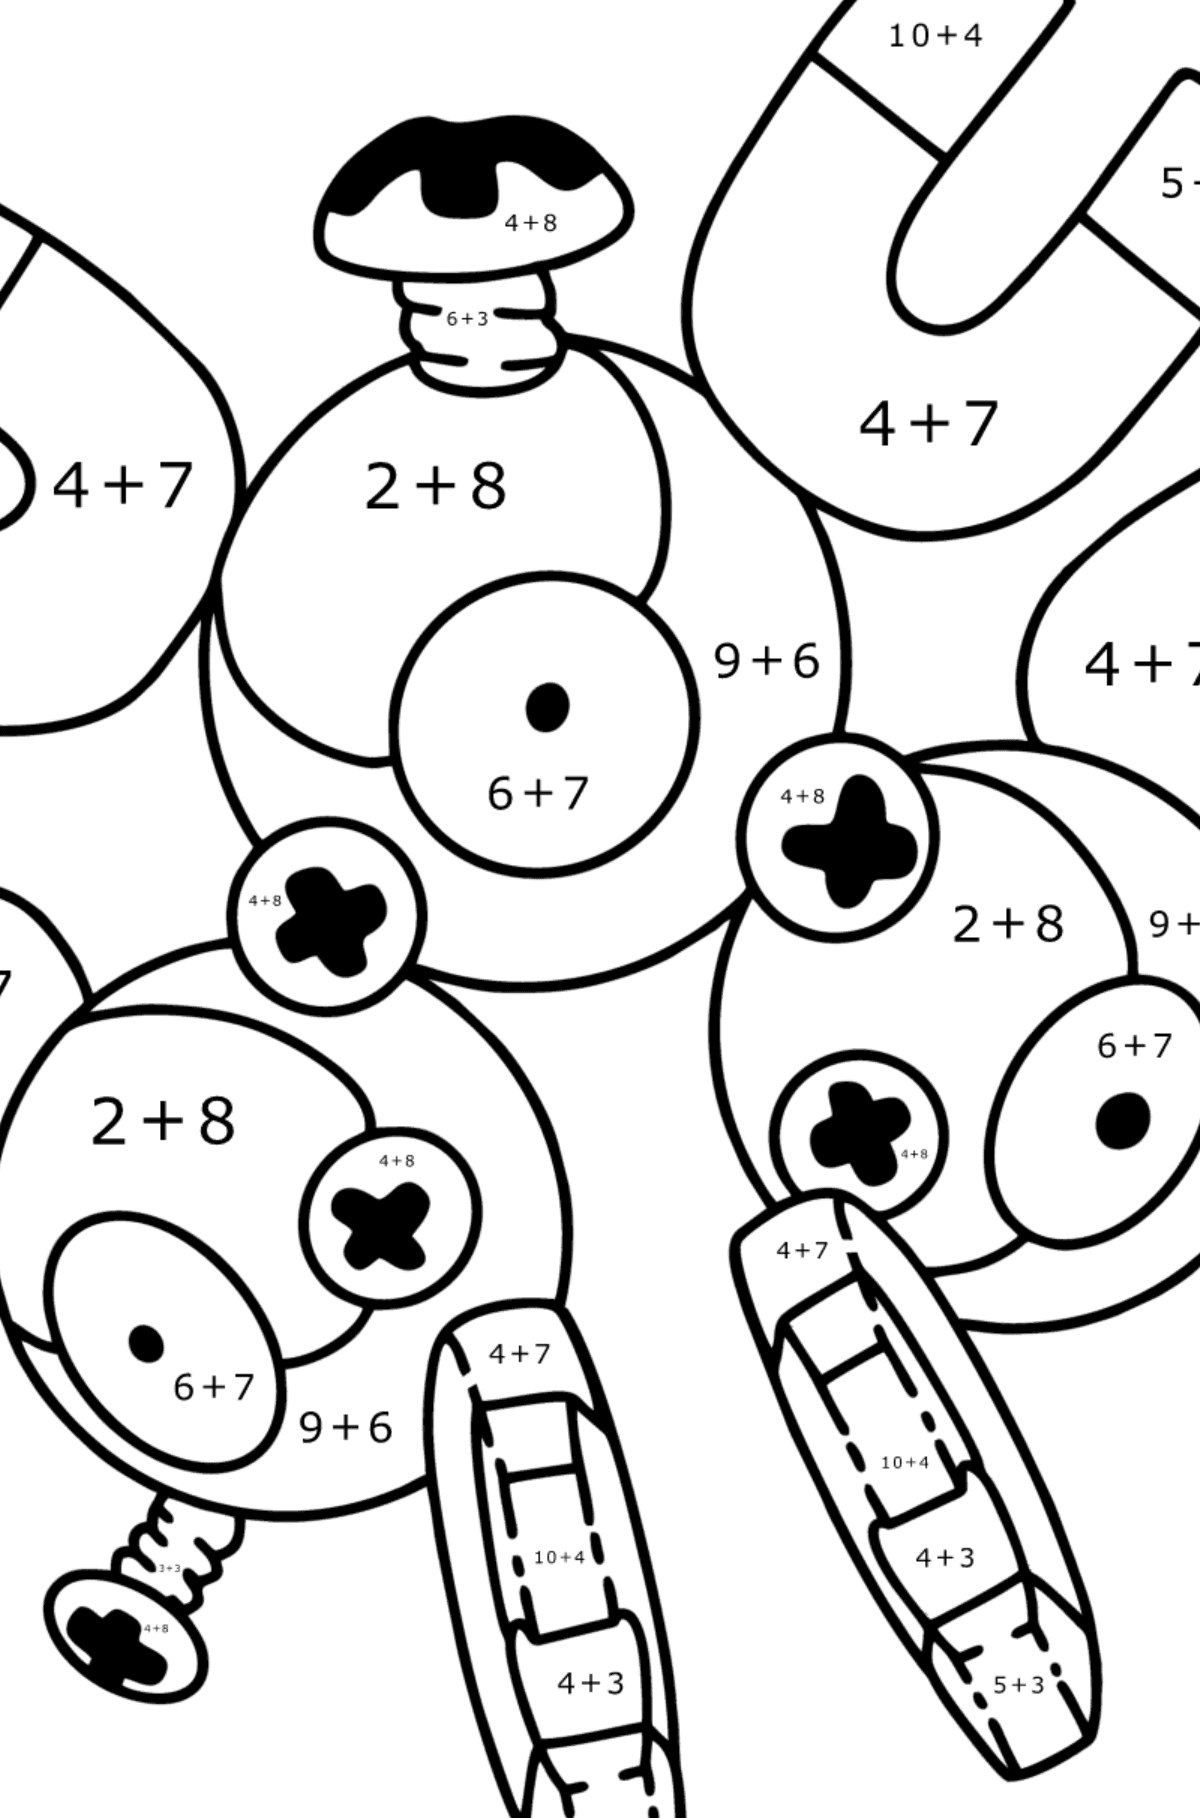 Coloring page Pokémon Go Magneton - Math Coloring - Addition for Kids